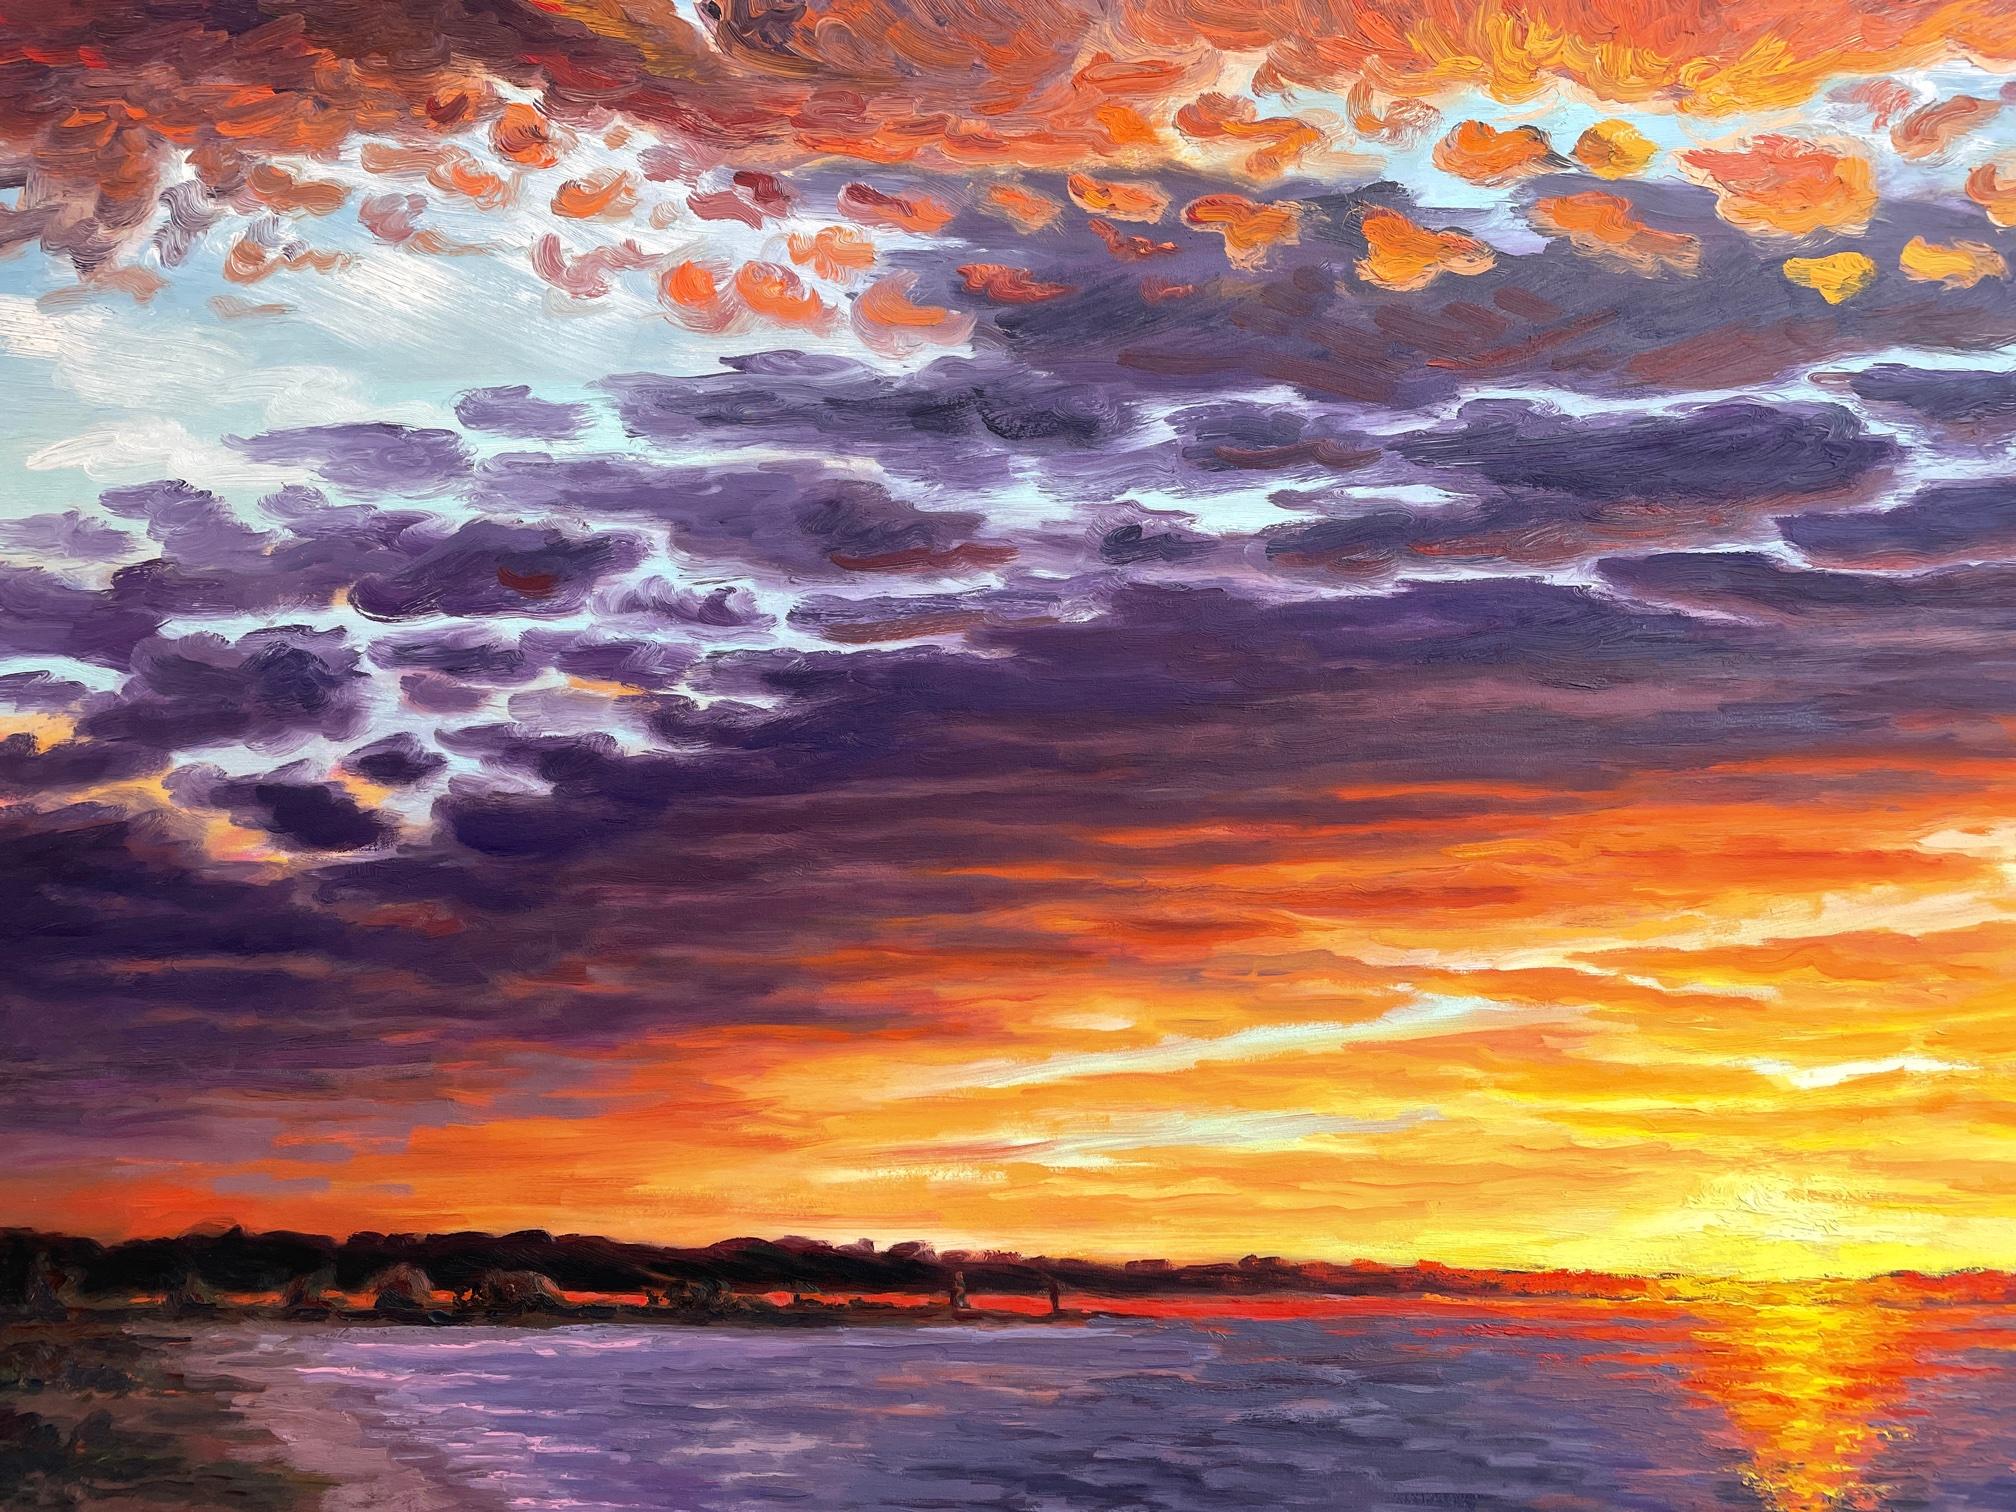 Turbulent cloud formation over the bay at sunset. Title - Turbulent Sunset - Painting by Carl Scorza